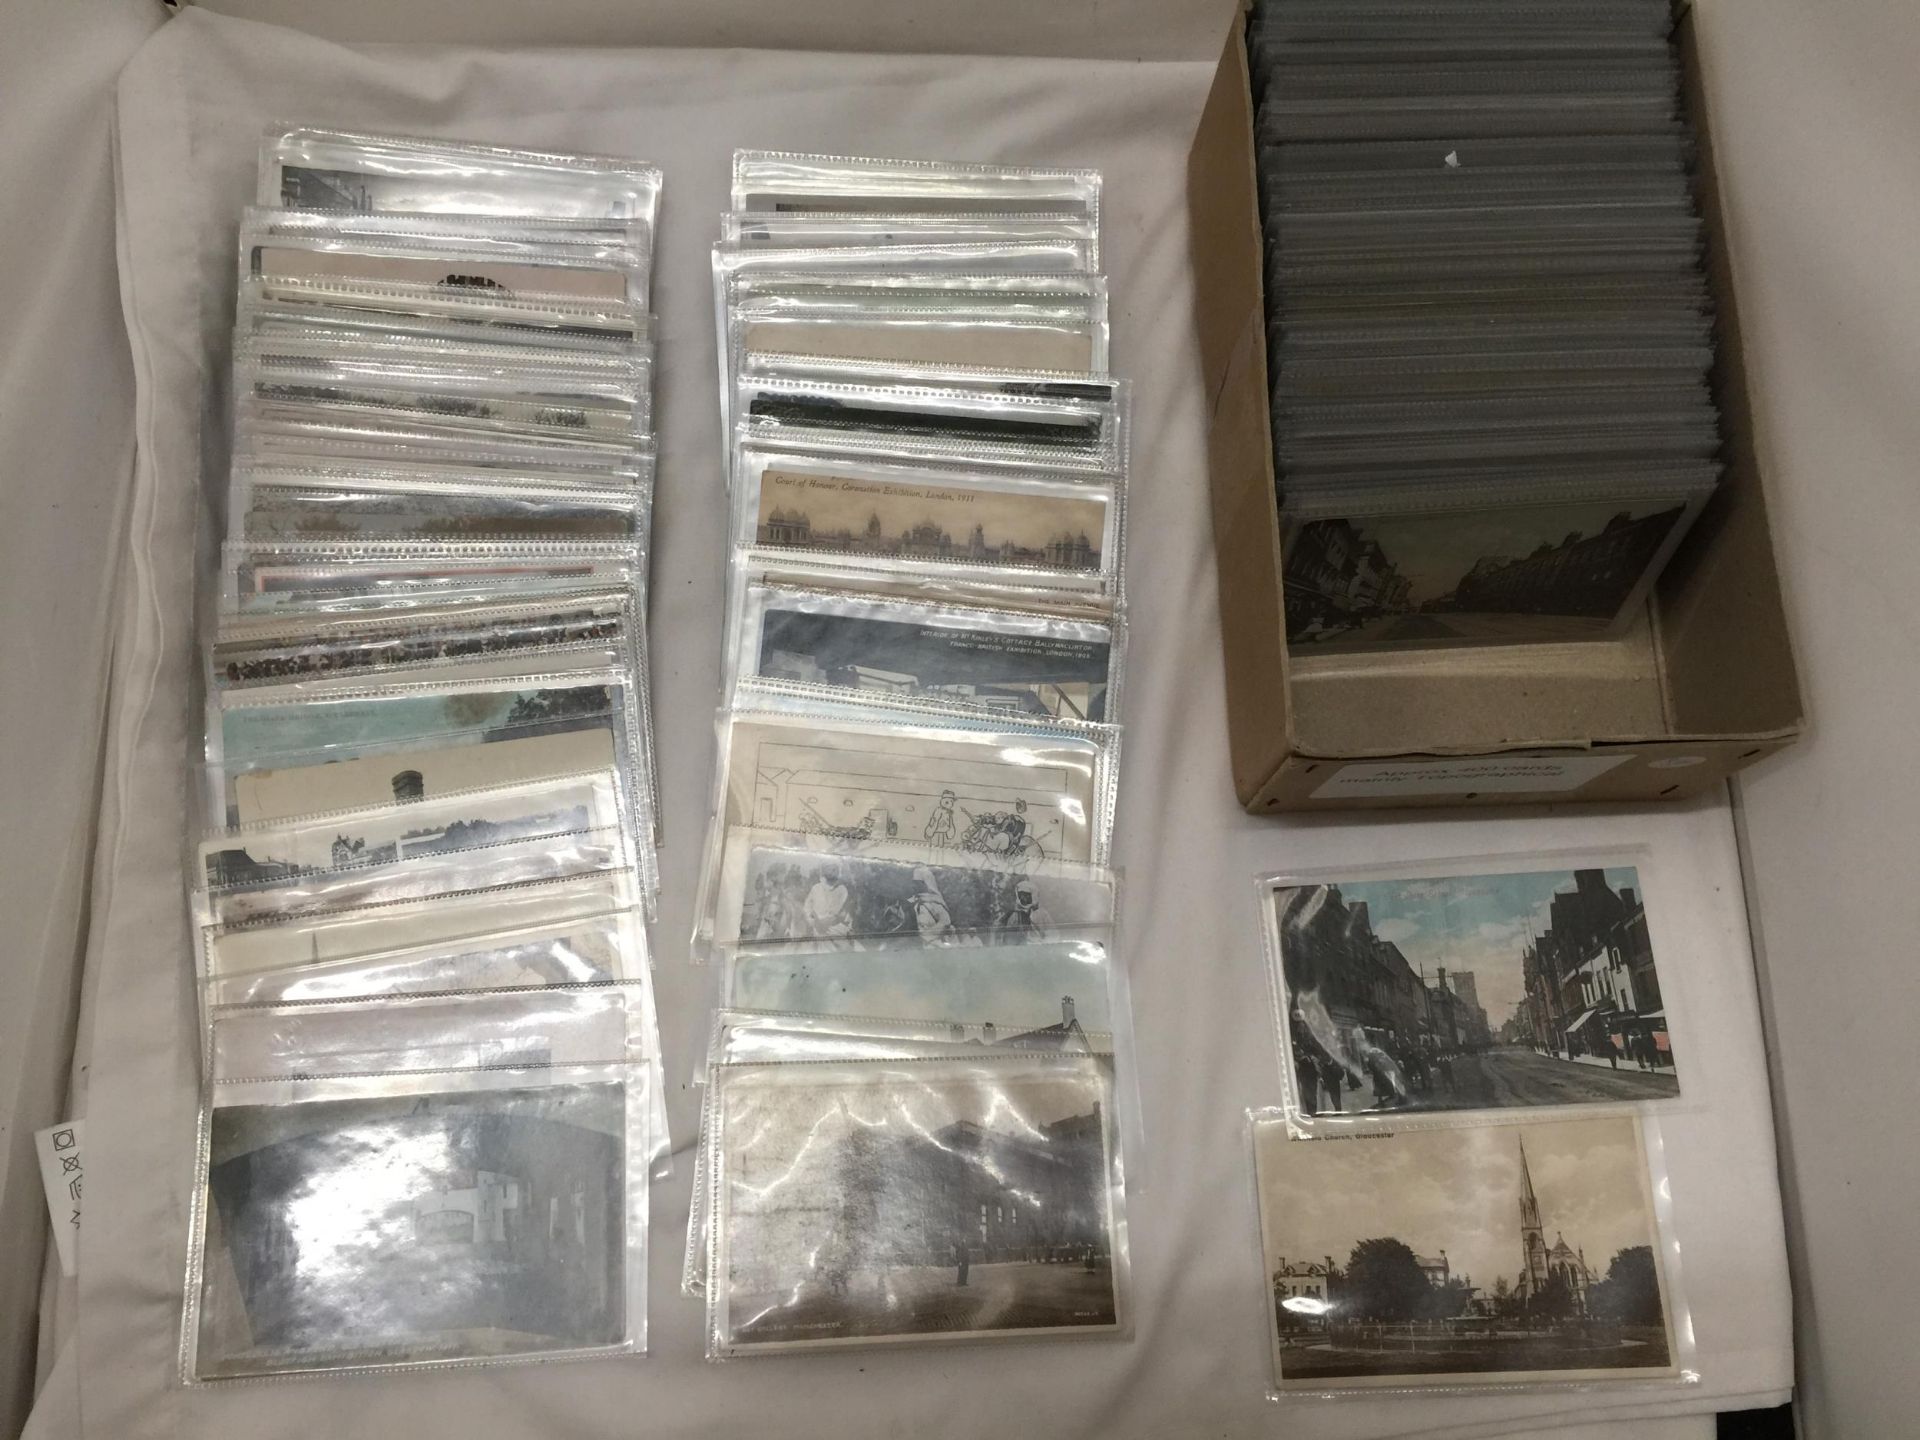 A LARGE COLLECTION OF MAINLY TOPOGRAPHICAL VINTAGE POSTCARDS IN PROTECTIVE SLEEVES